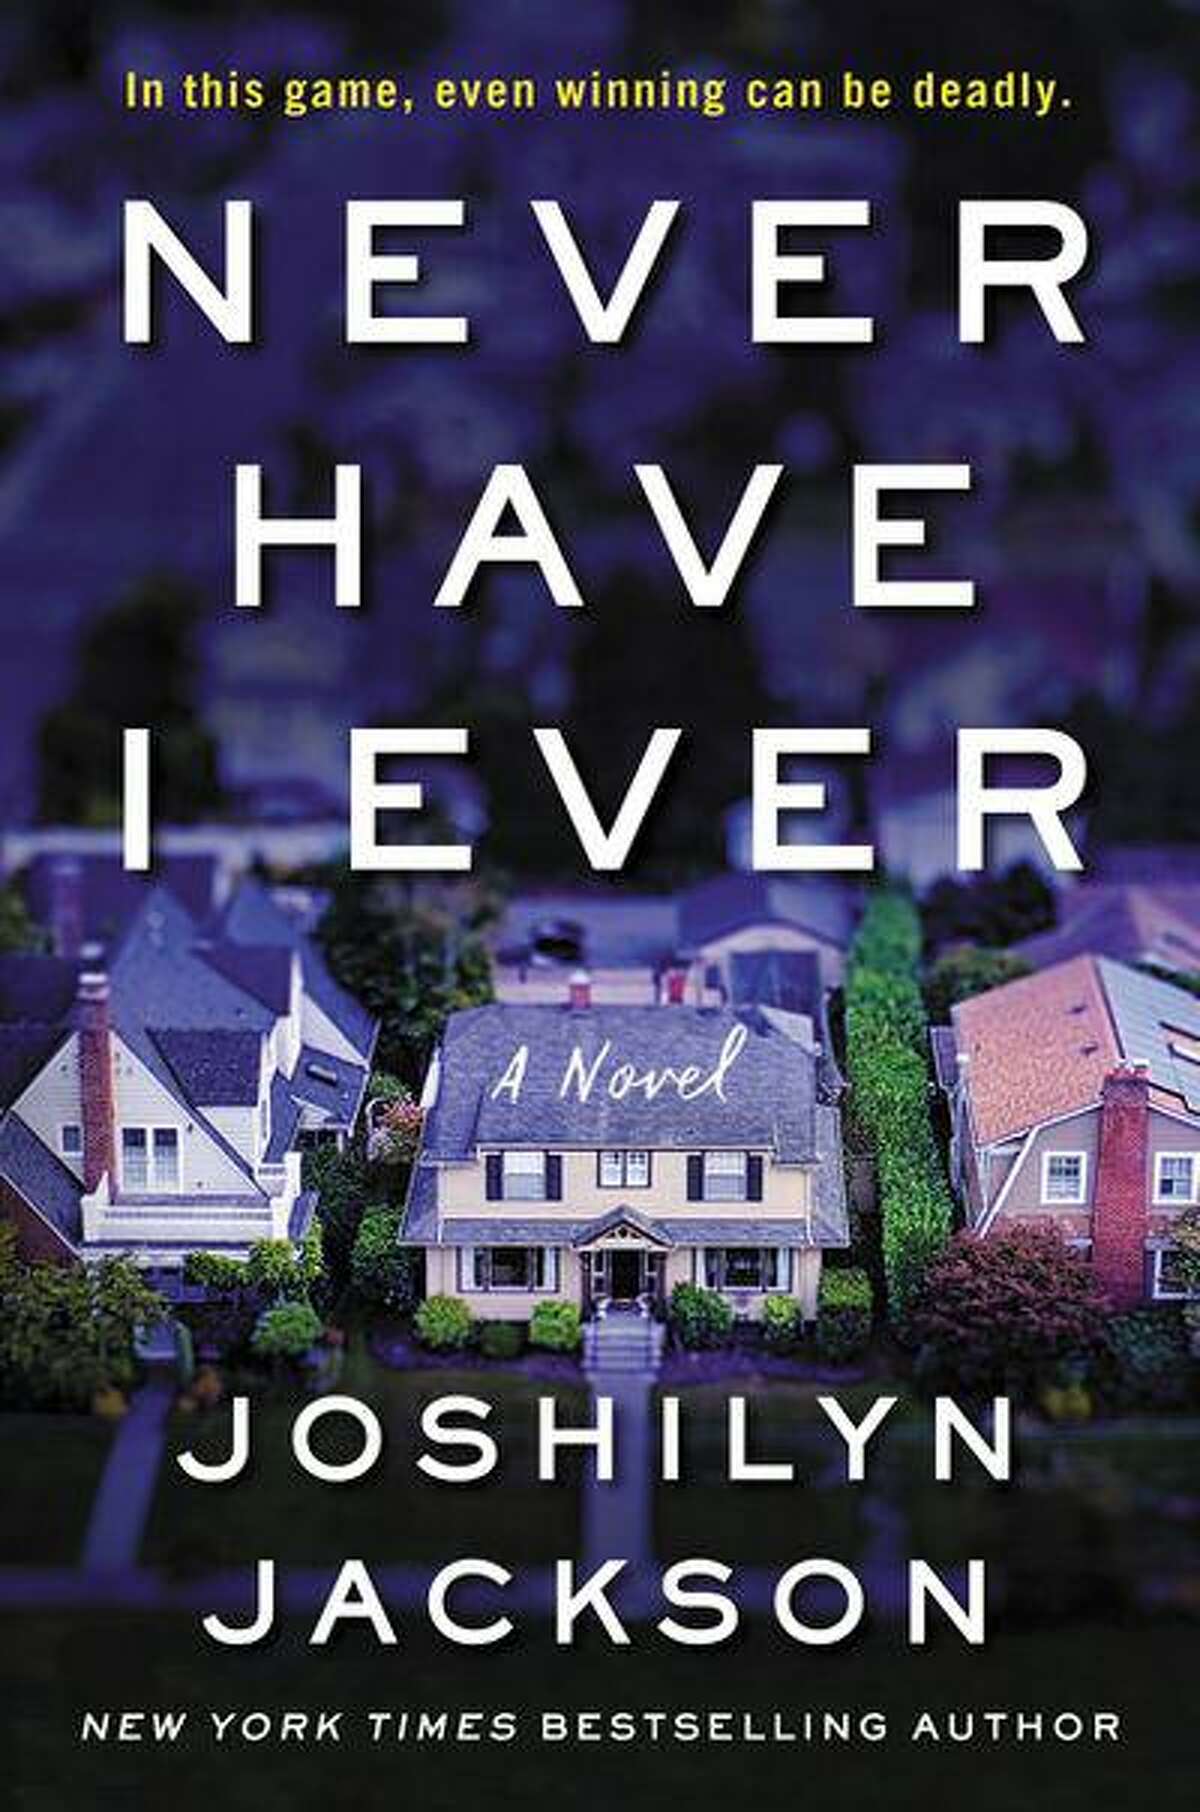 “Never Have I Ever” by Joshilyn Jackson.